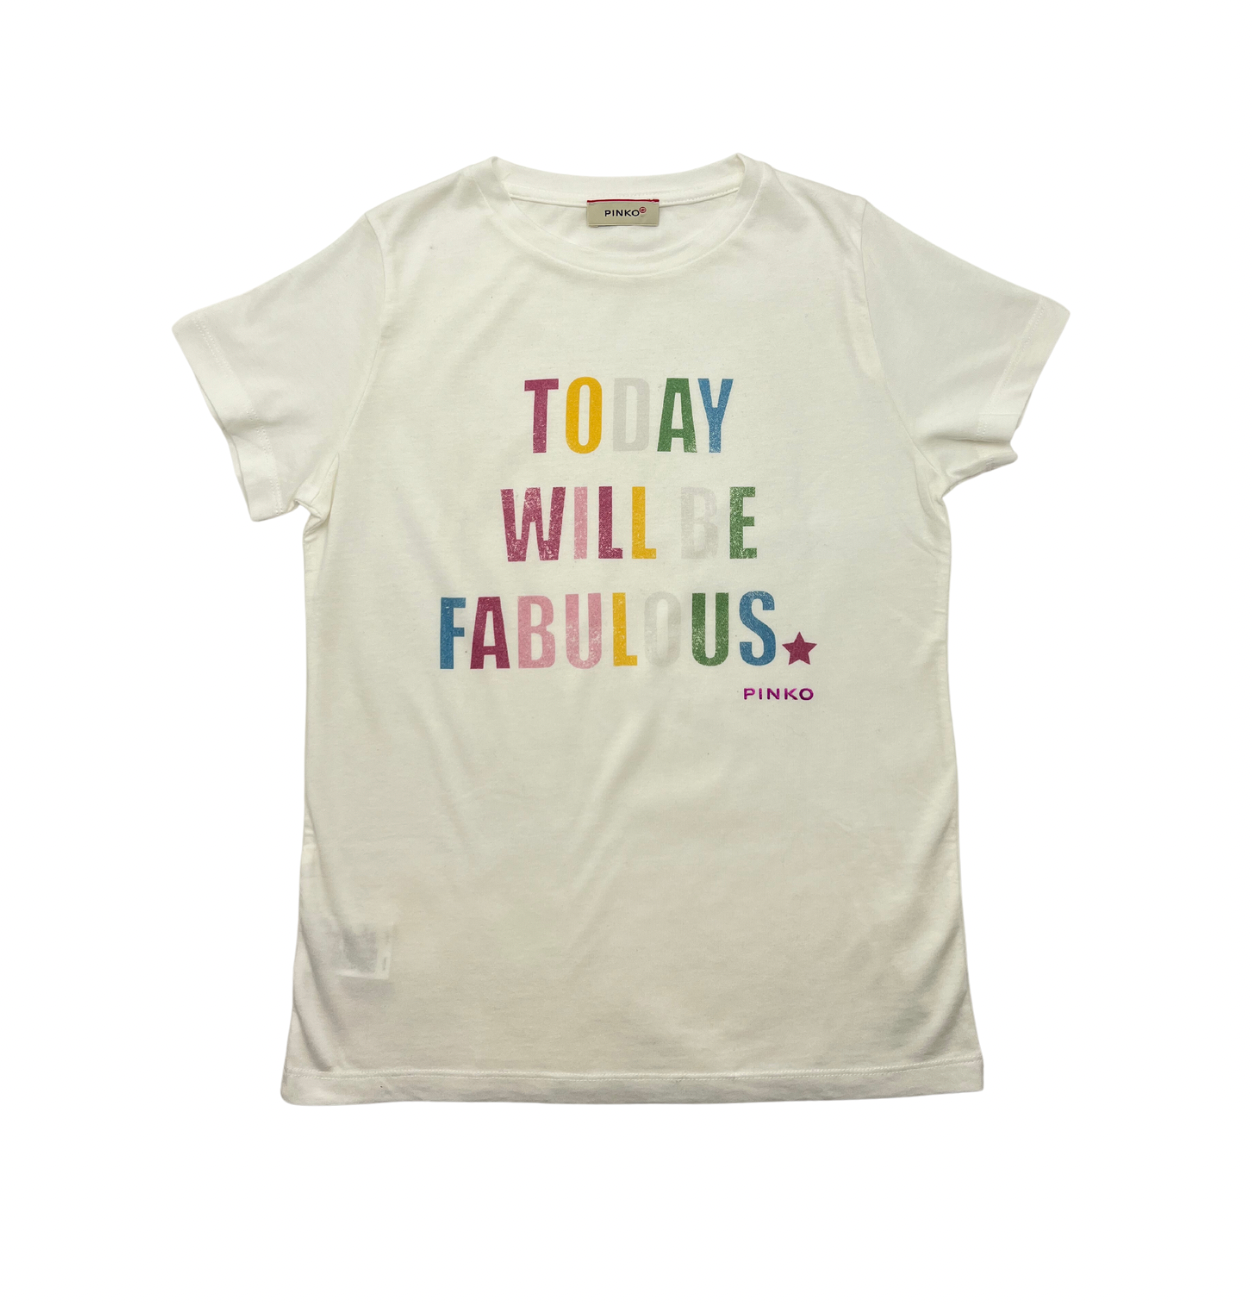 PINKO - T-shirt today will be fabulous - 12 ans